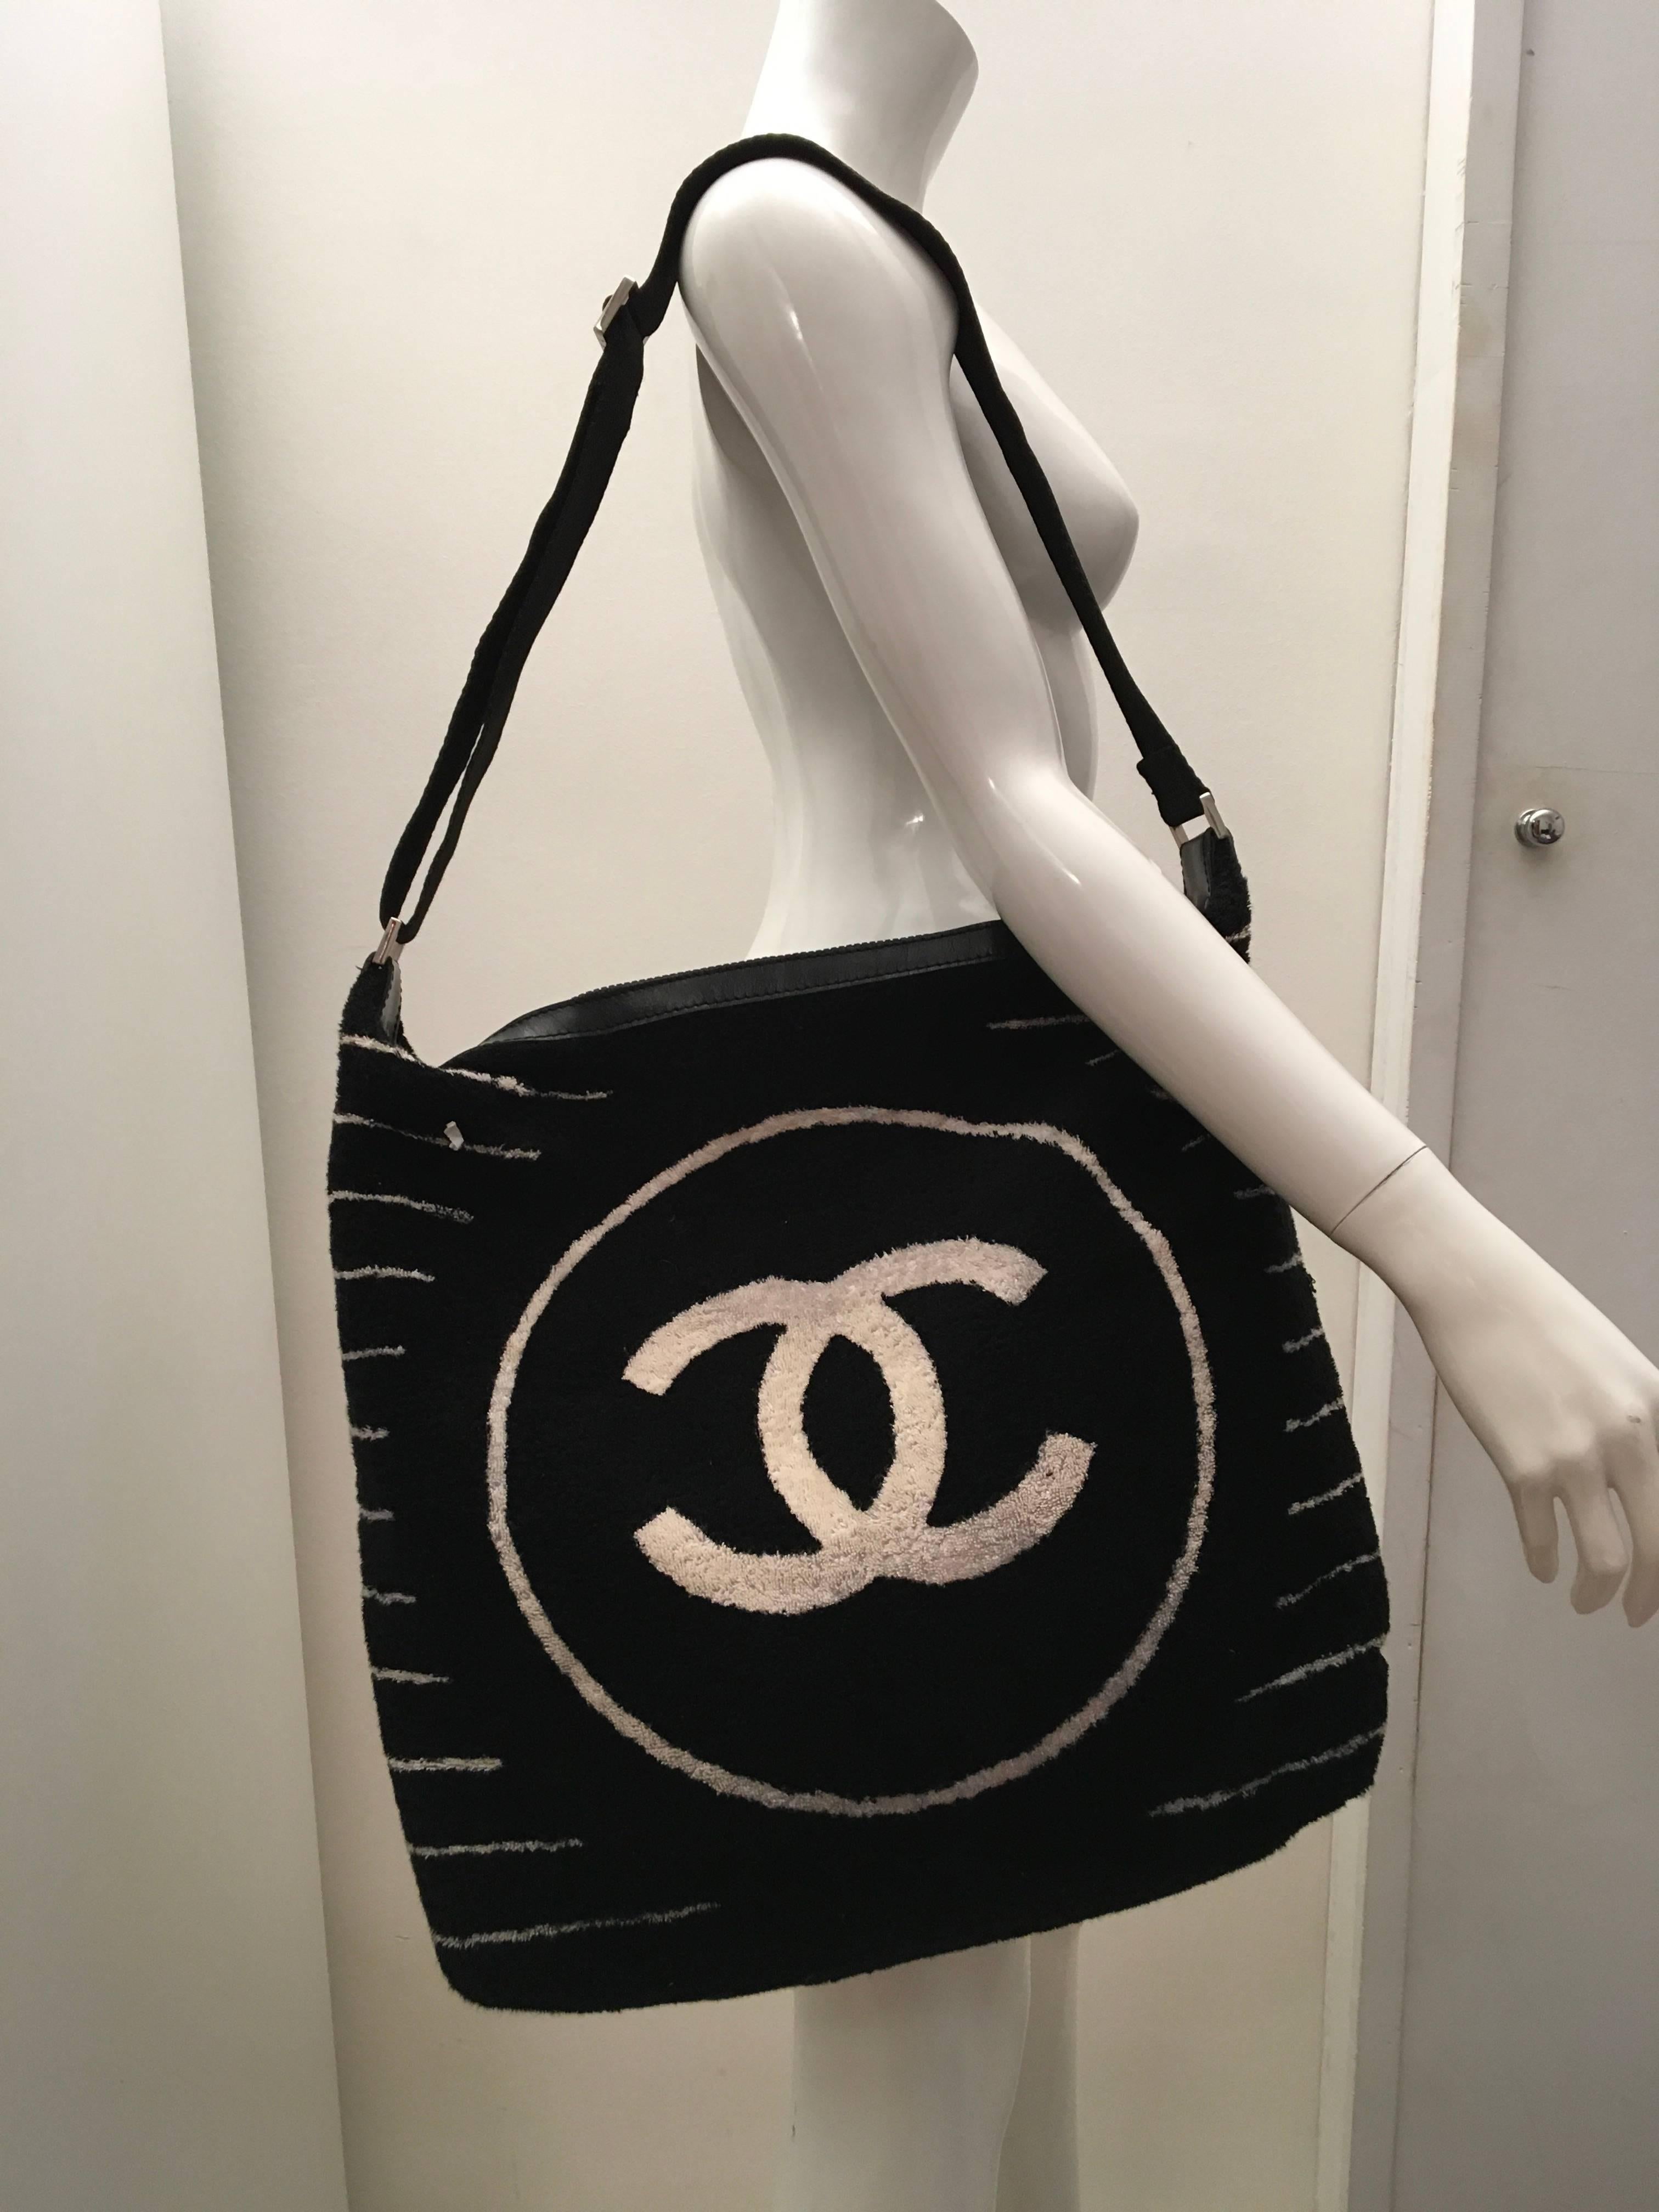 Chanel Purse/Beach Bag  Terry Cloth Black  In Excellent Condition For Sale In Boca Raton, FL